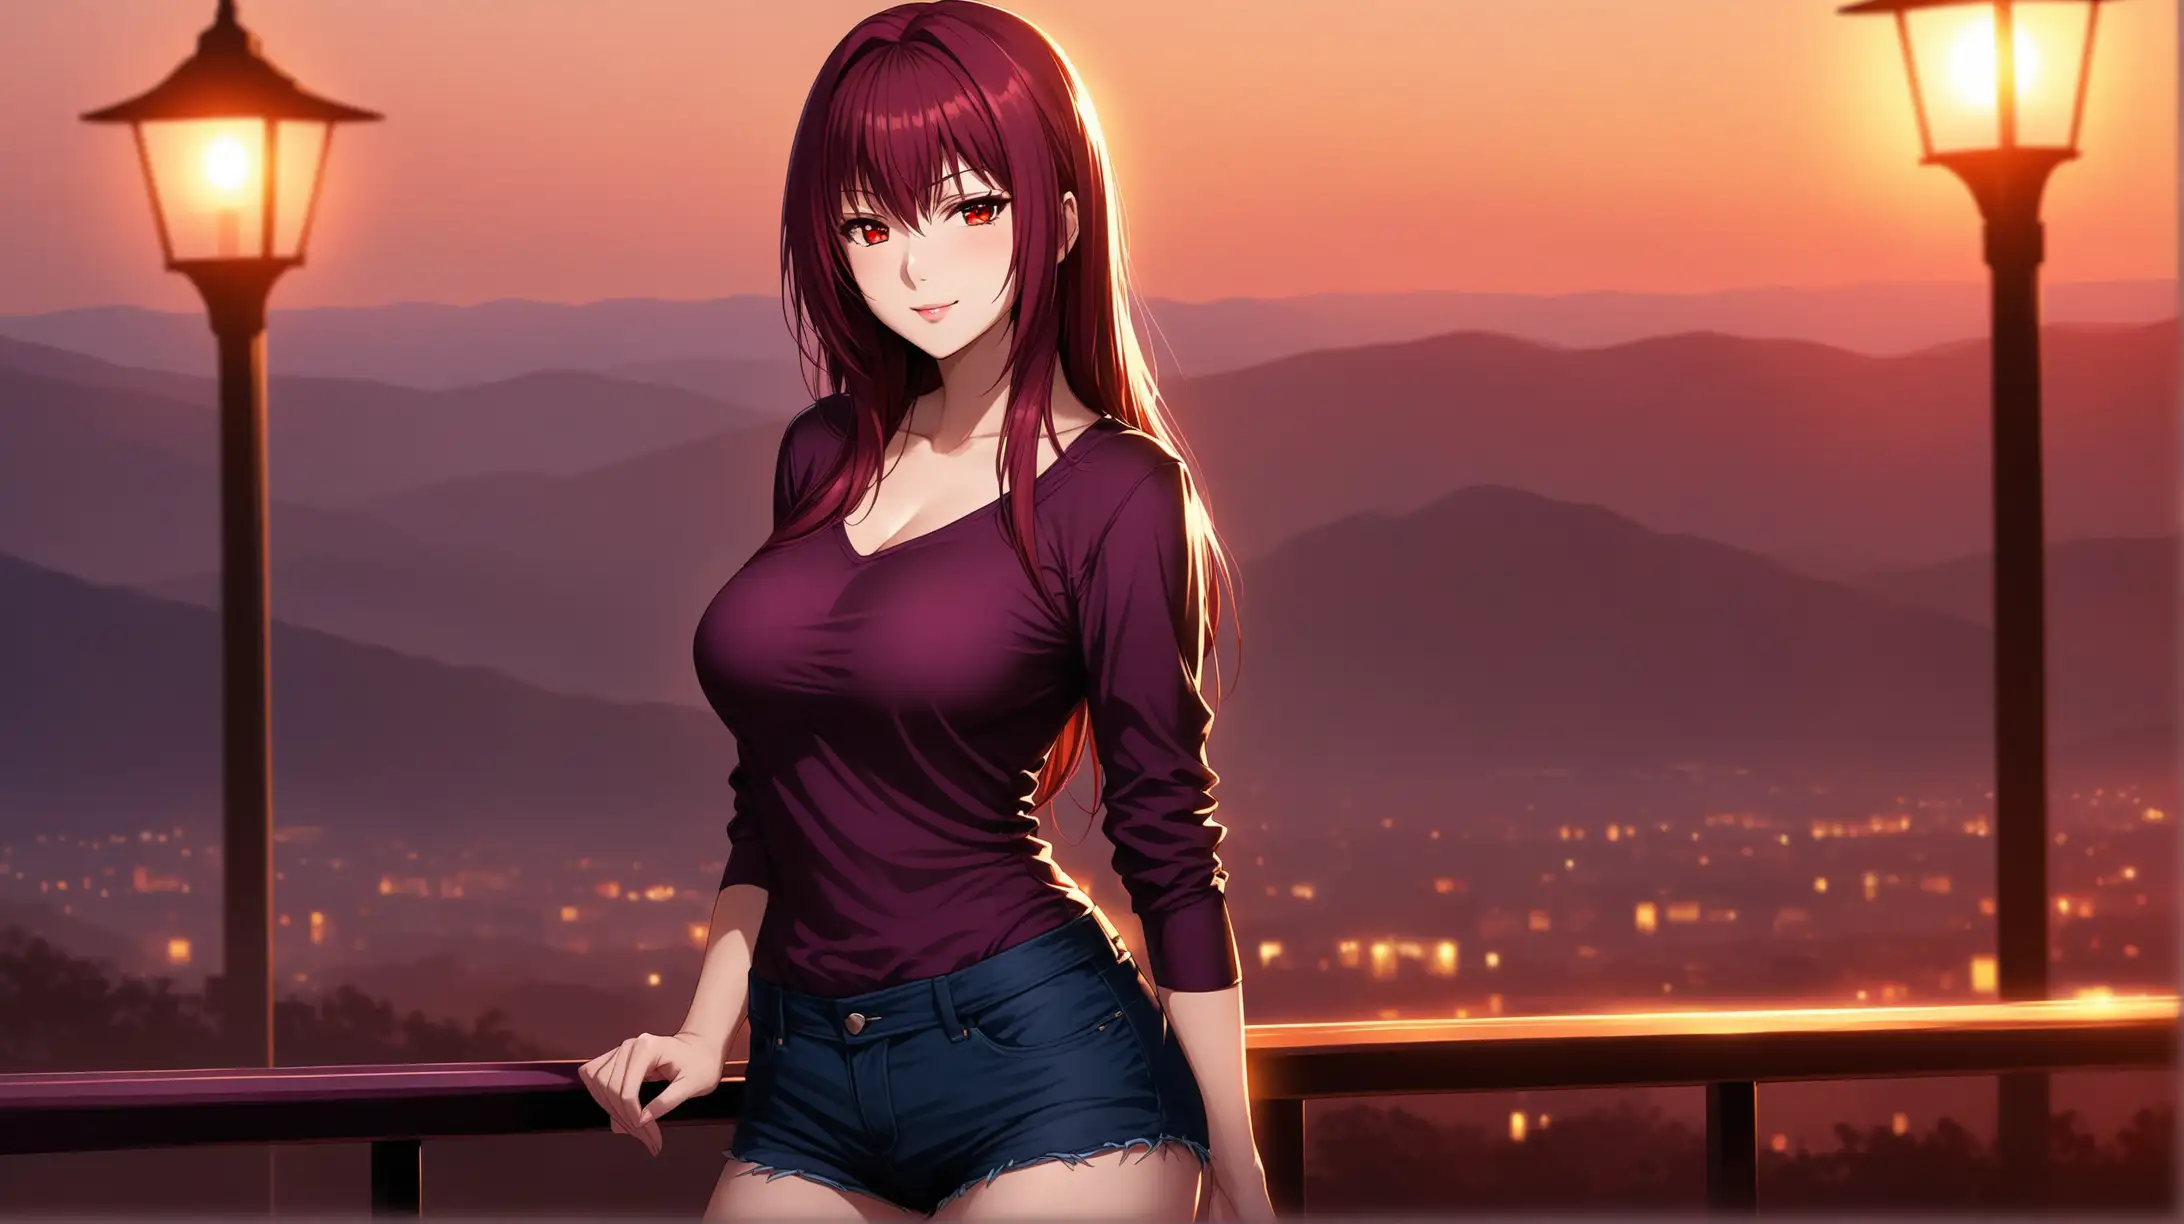 Seductive Scathach with Red Eyes in Ambient Outdoor Lighting